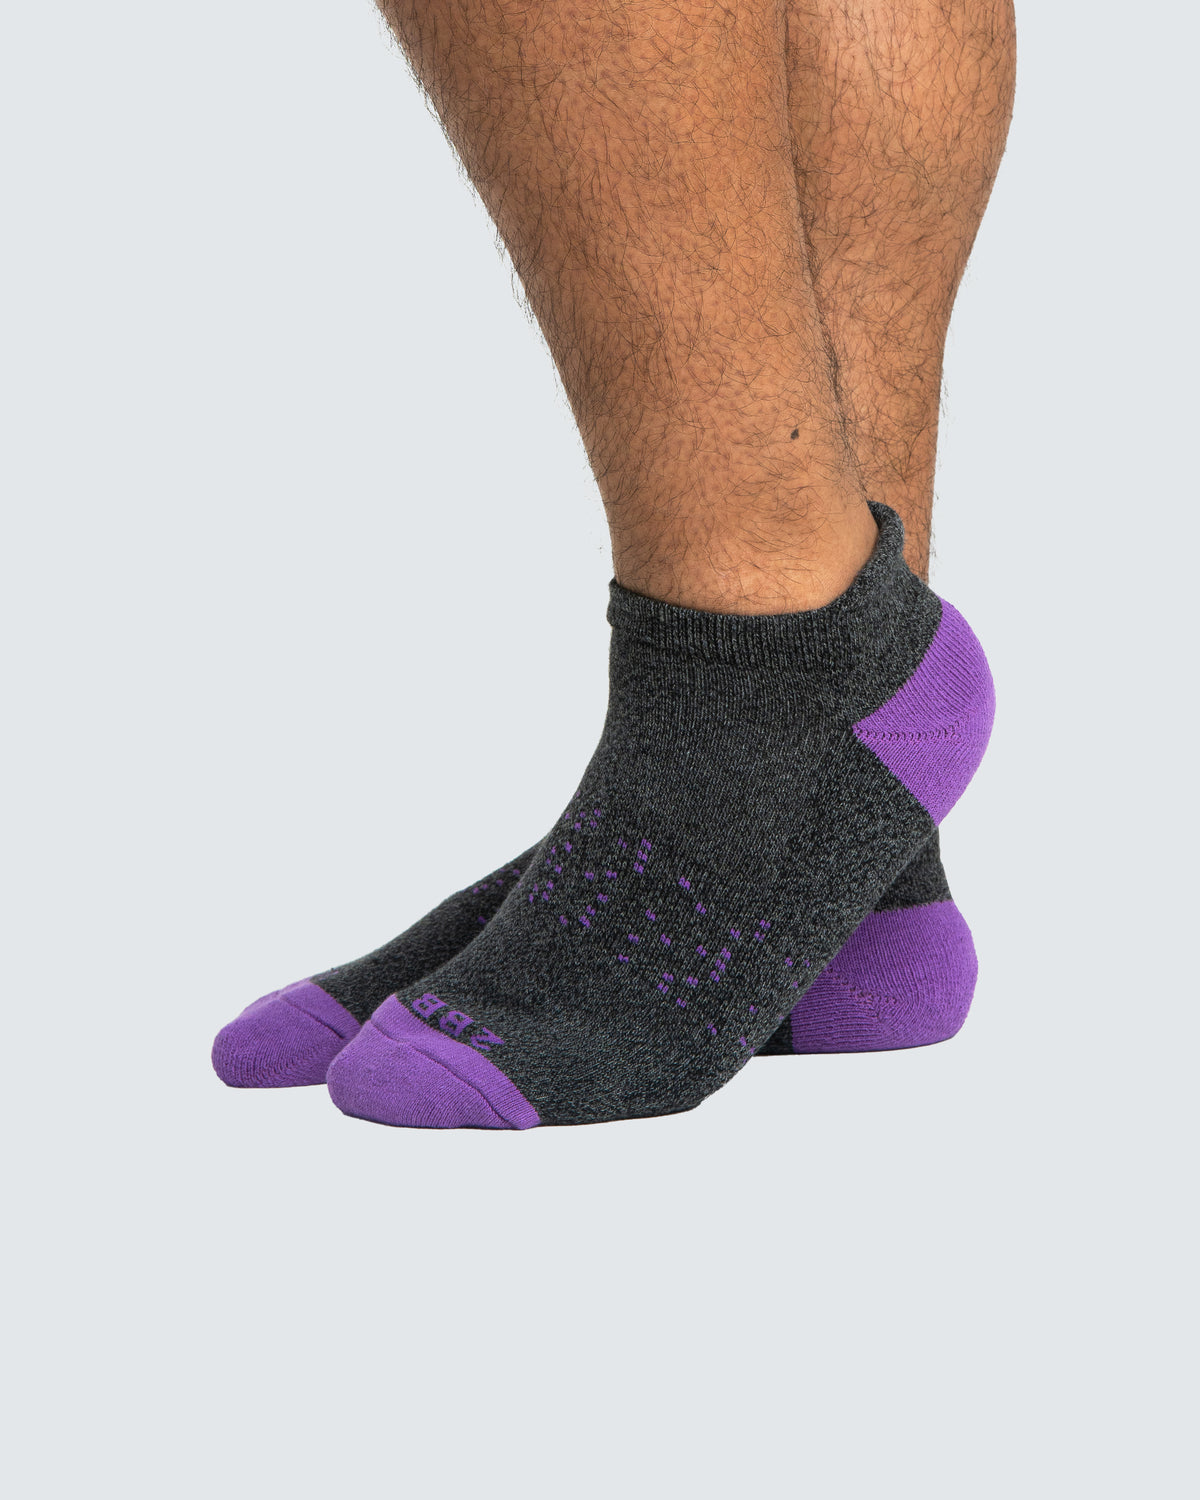 Two Blind Brothers - Gift 2BB Rainbow Ankle Sock Bundle (6 Pairs) purple